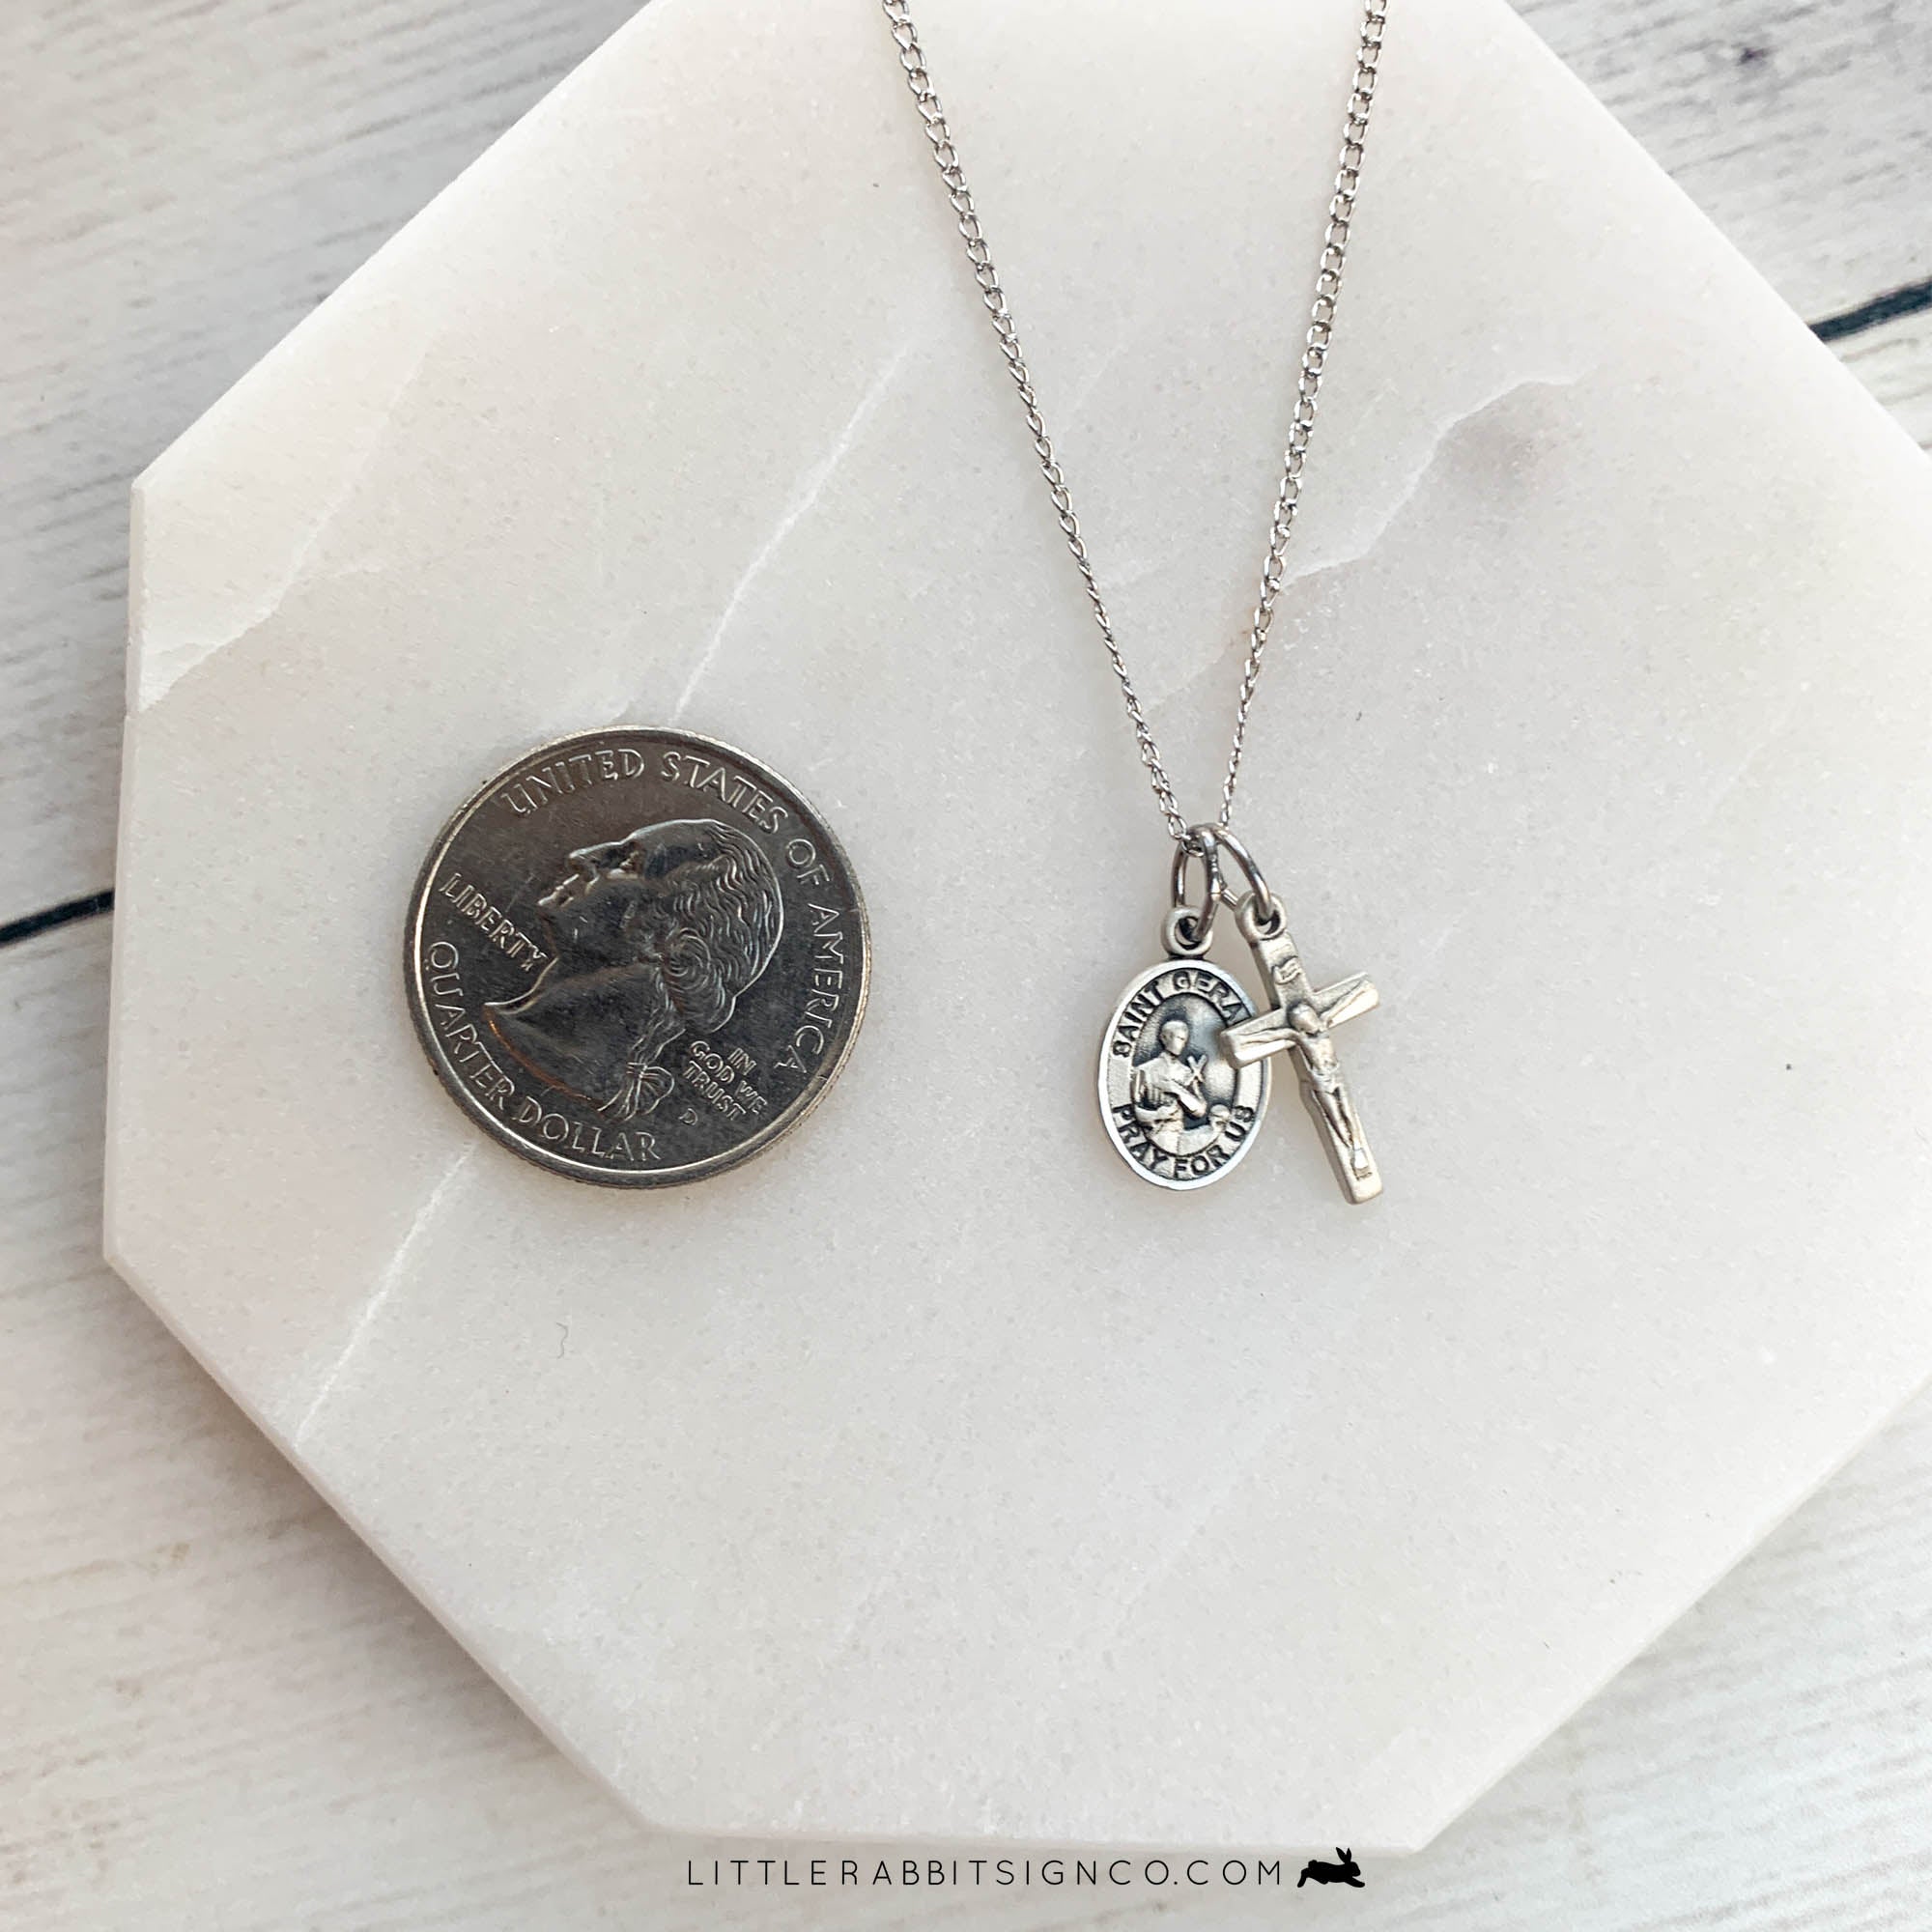 Buy Bronze Saint Gerard Majella Medal Pendant Necklace, French Antique  Replica, Artist Penin, Patron Saint of Expectant Mothers, of Fertility  Online in India - Etsy